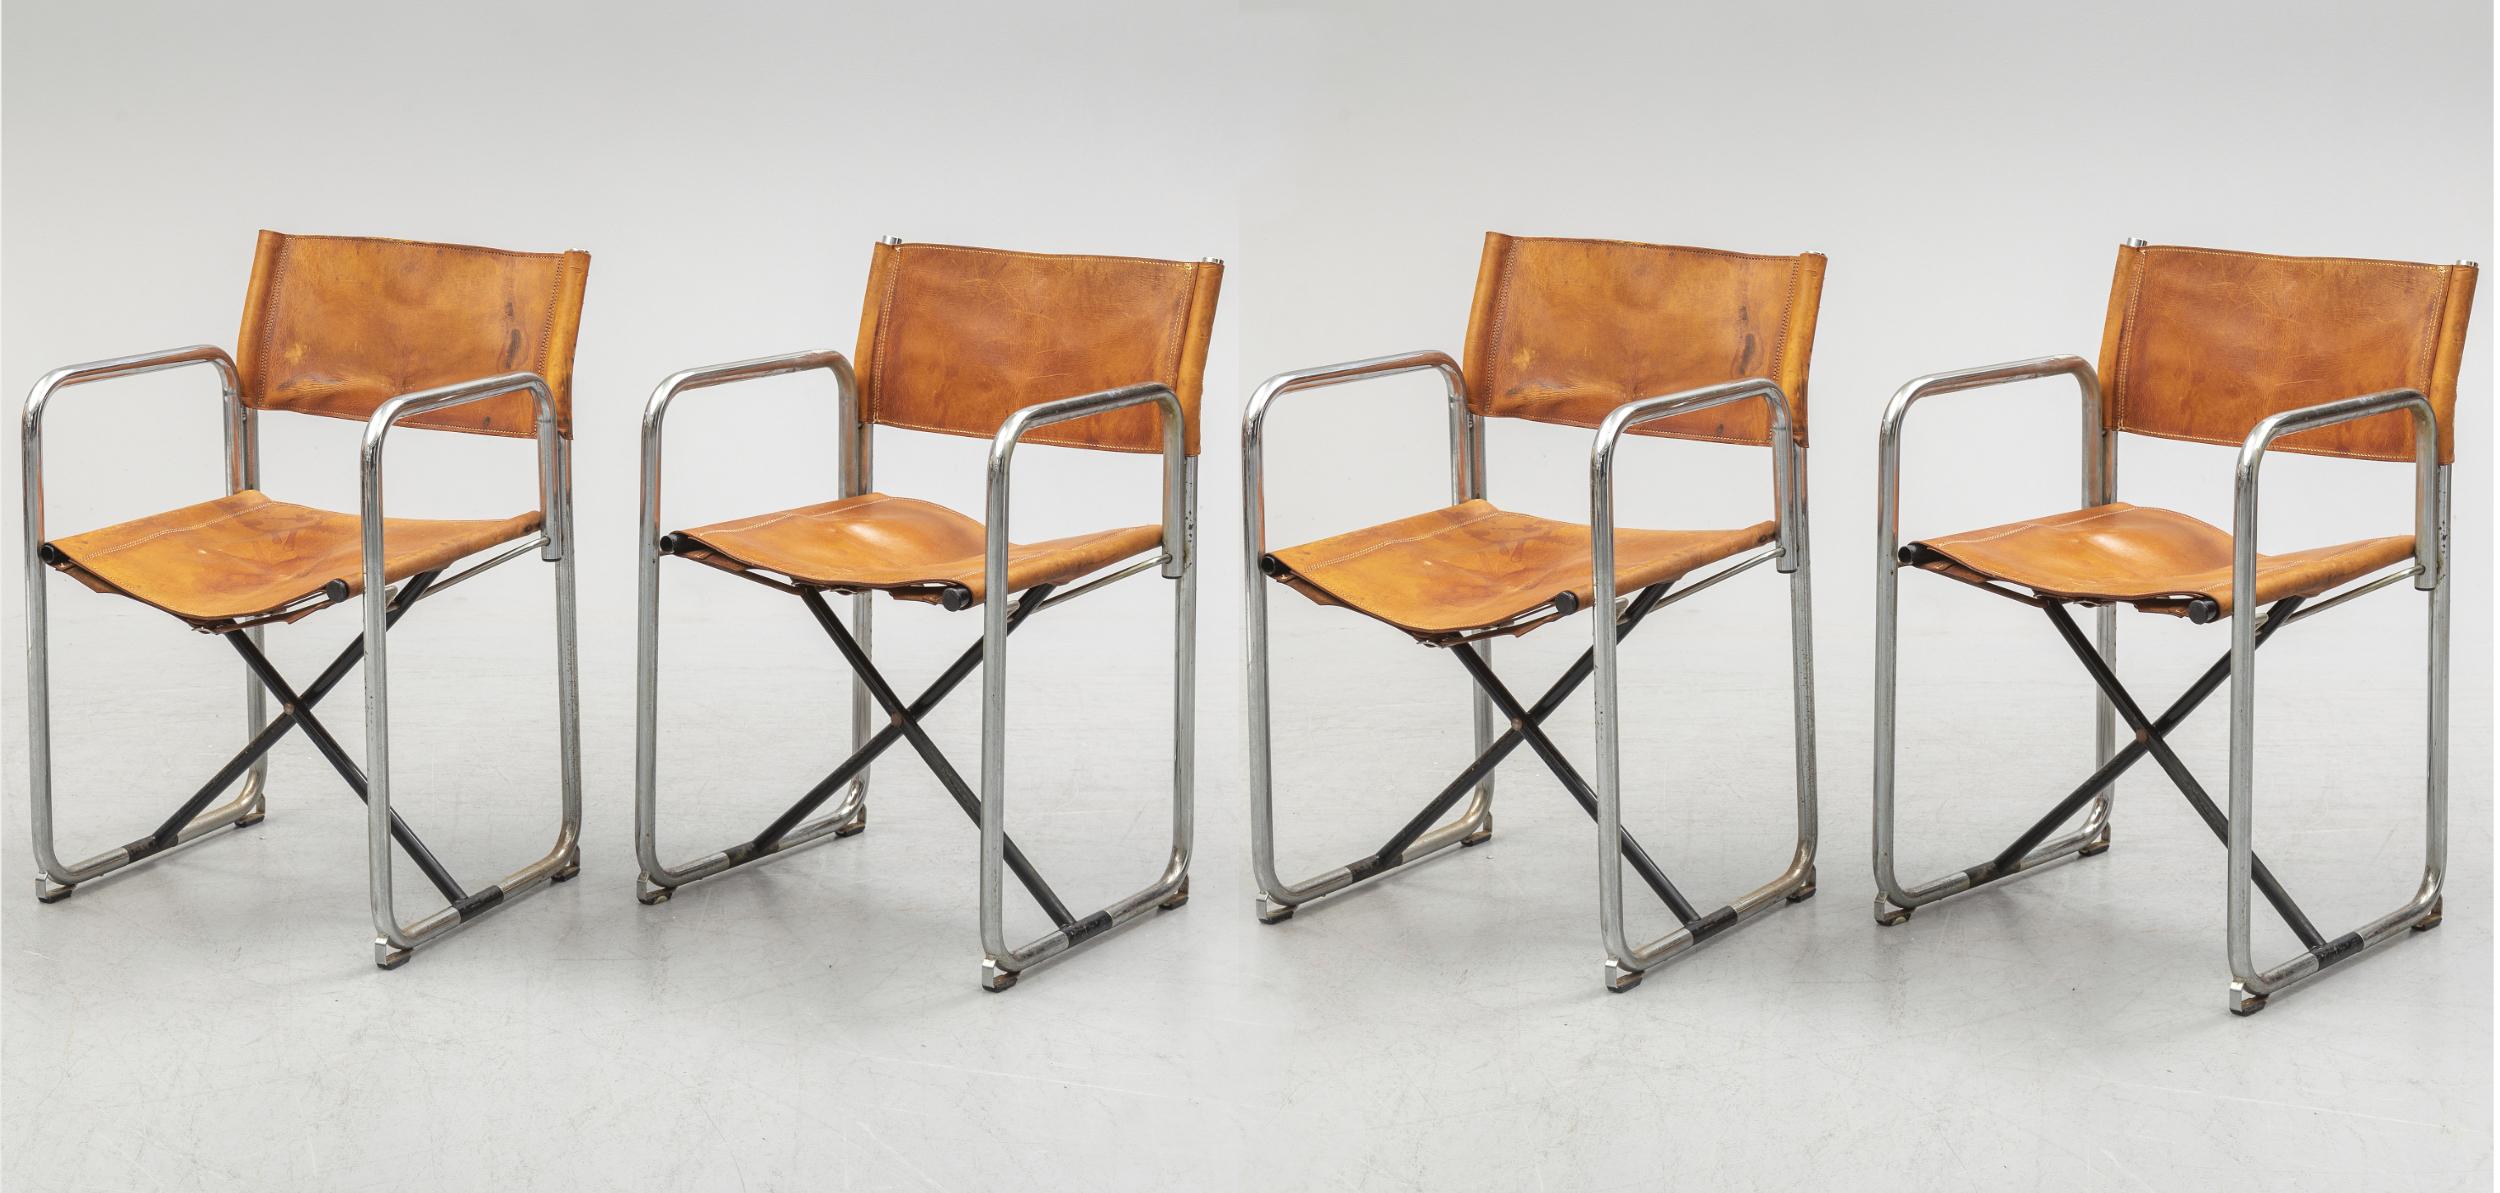 Early set of four folding chairs in chromed steel and original vegetal tanned leather, designed by Borge Lindau & Bo Lindekrantz and produced from the 1960s by Swedish Lammhults.